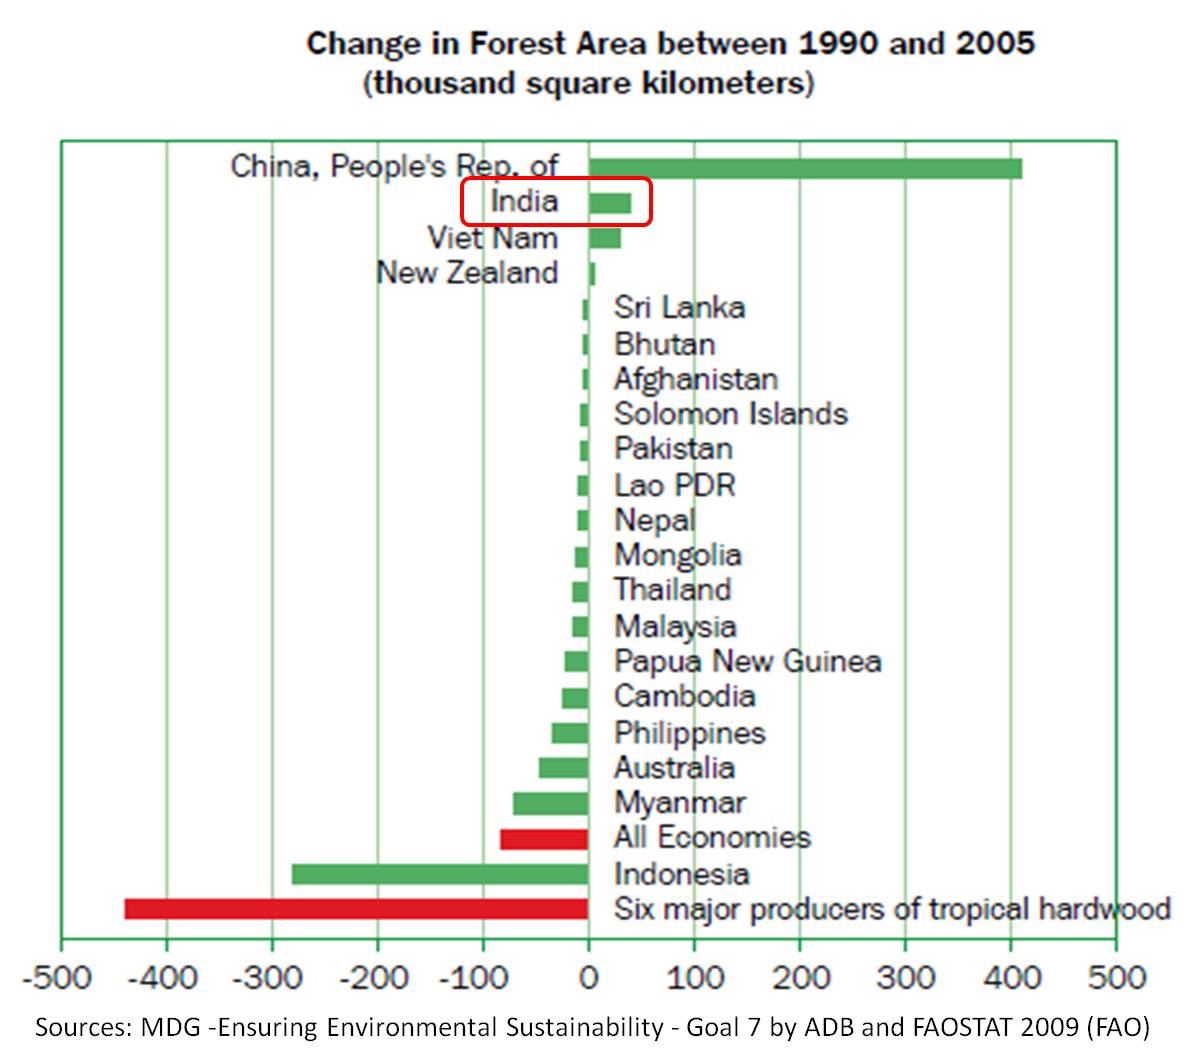 Change in Forest Area between 1990 and 2005 in thousand square kilometers